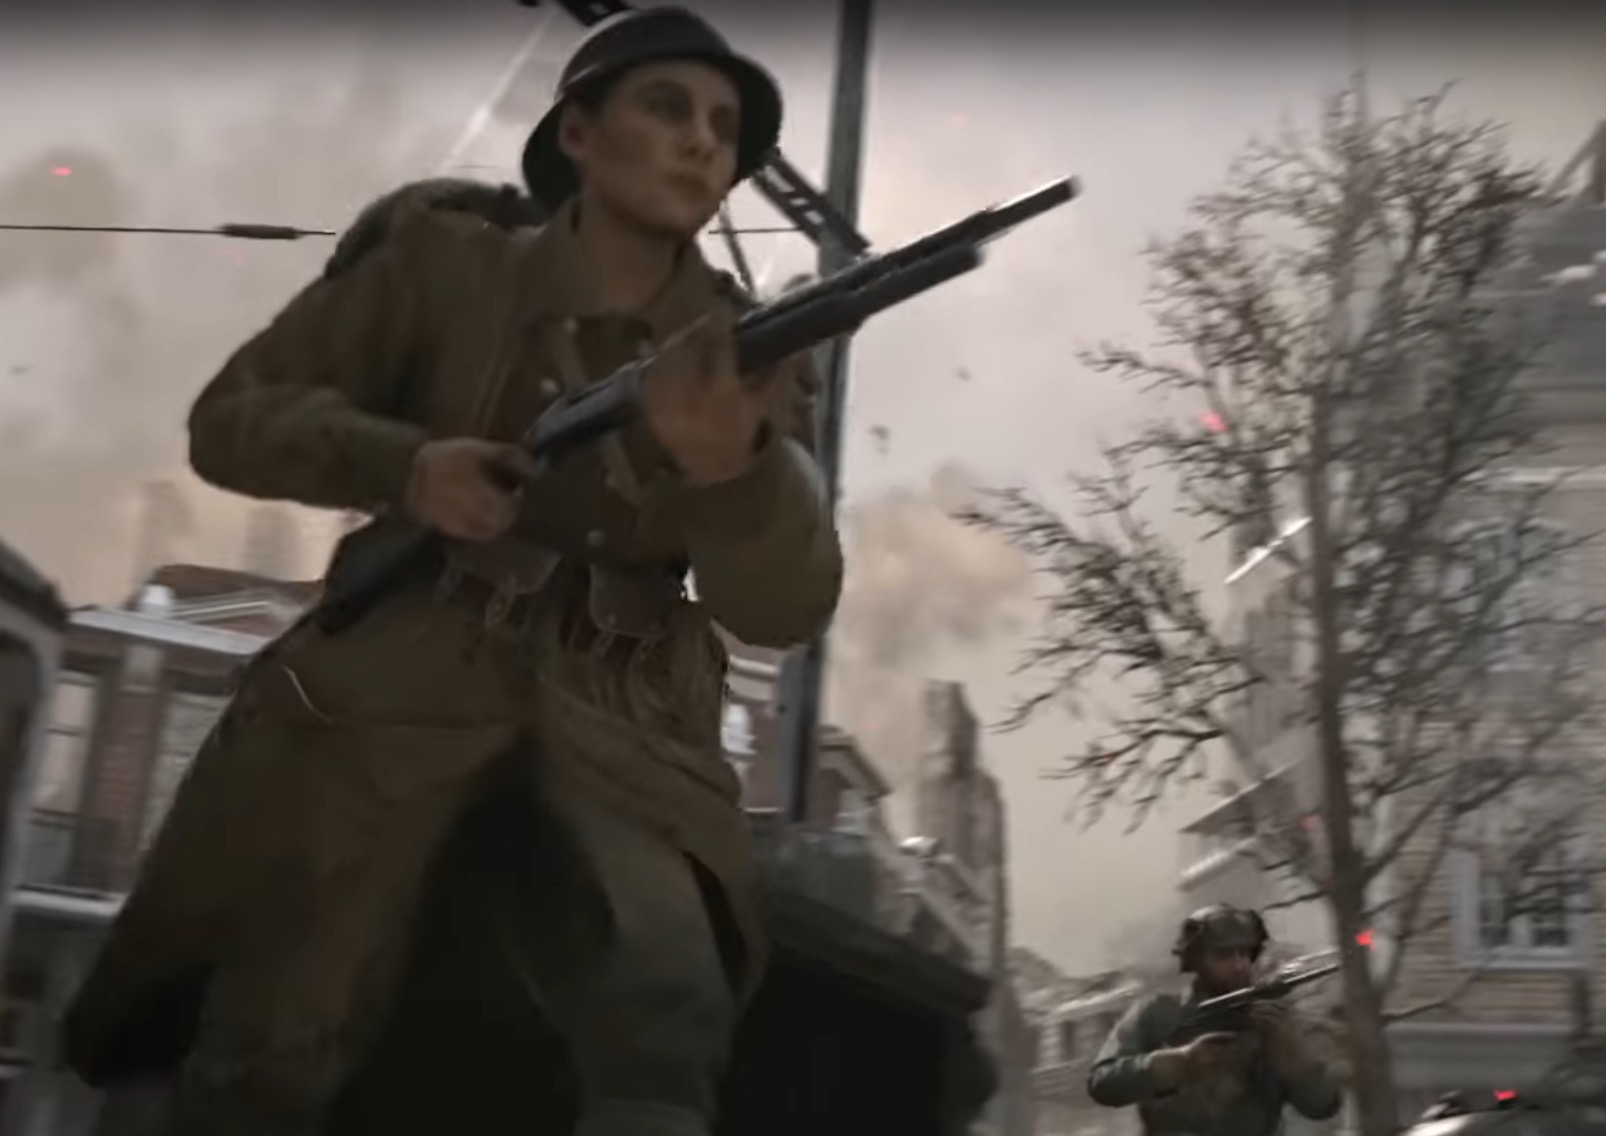 You can hear and see a woman player in the multiplayer trailer.